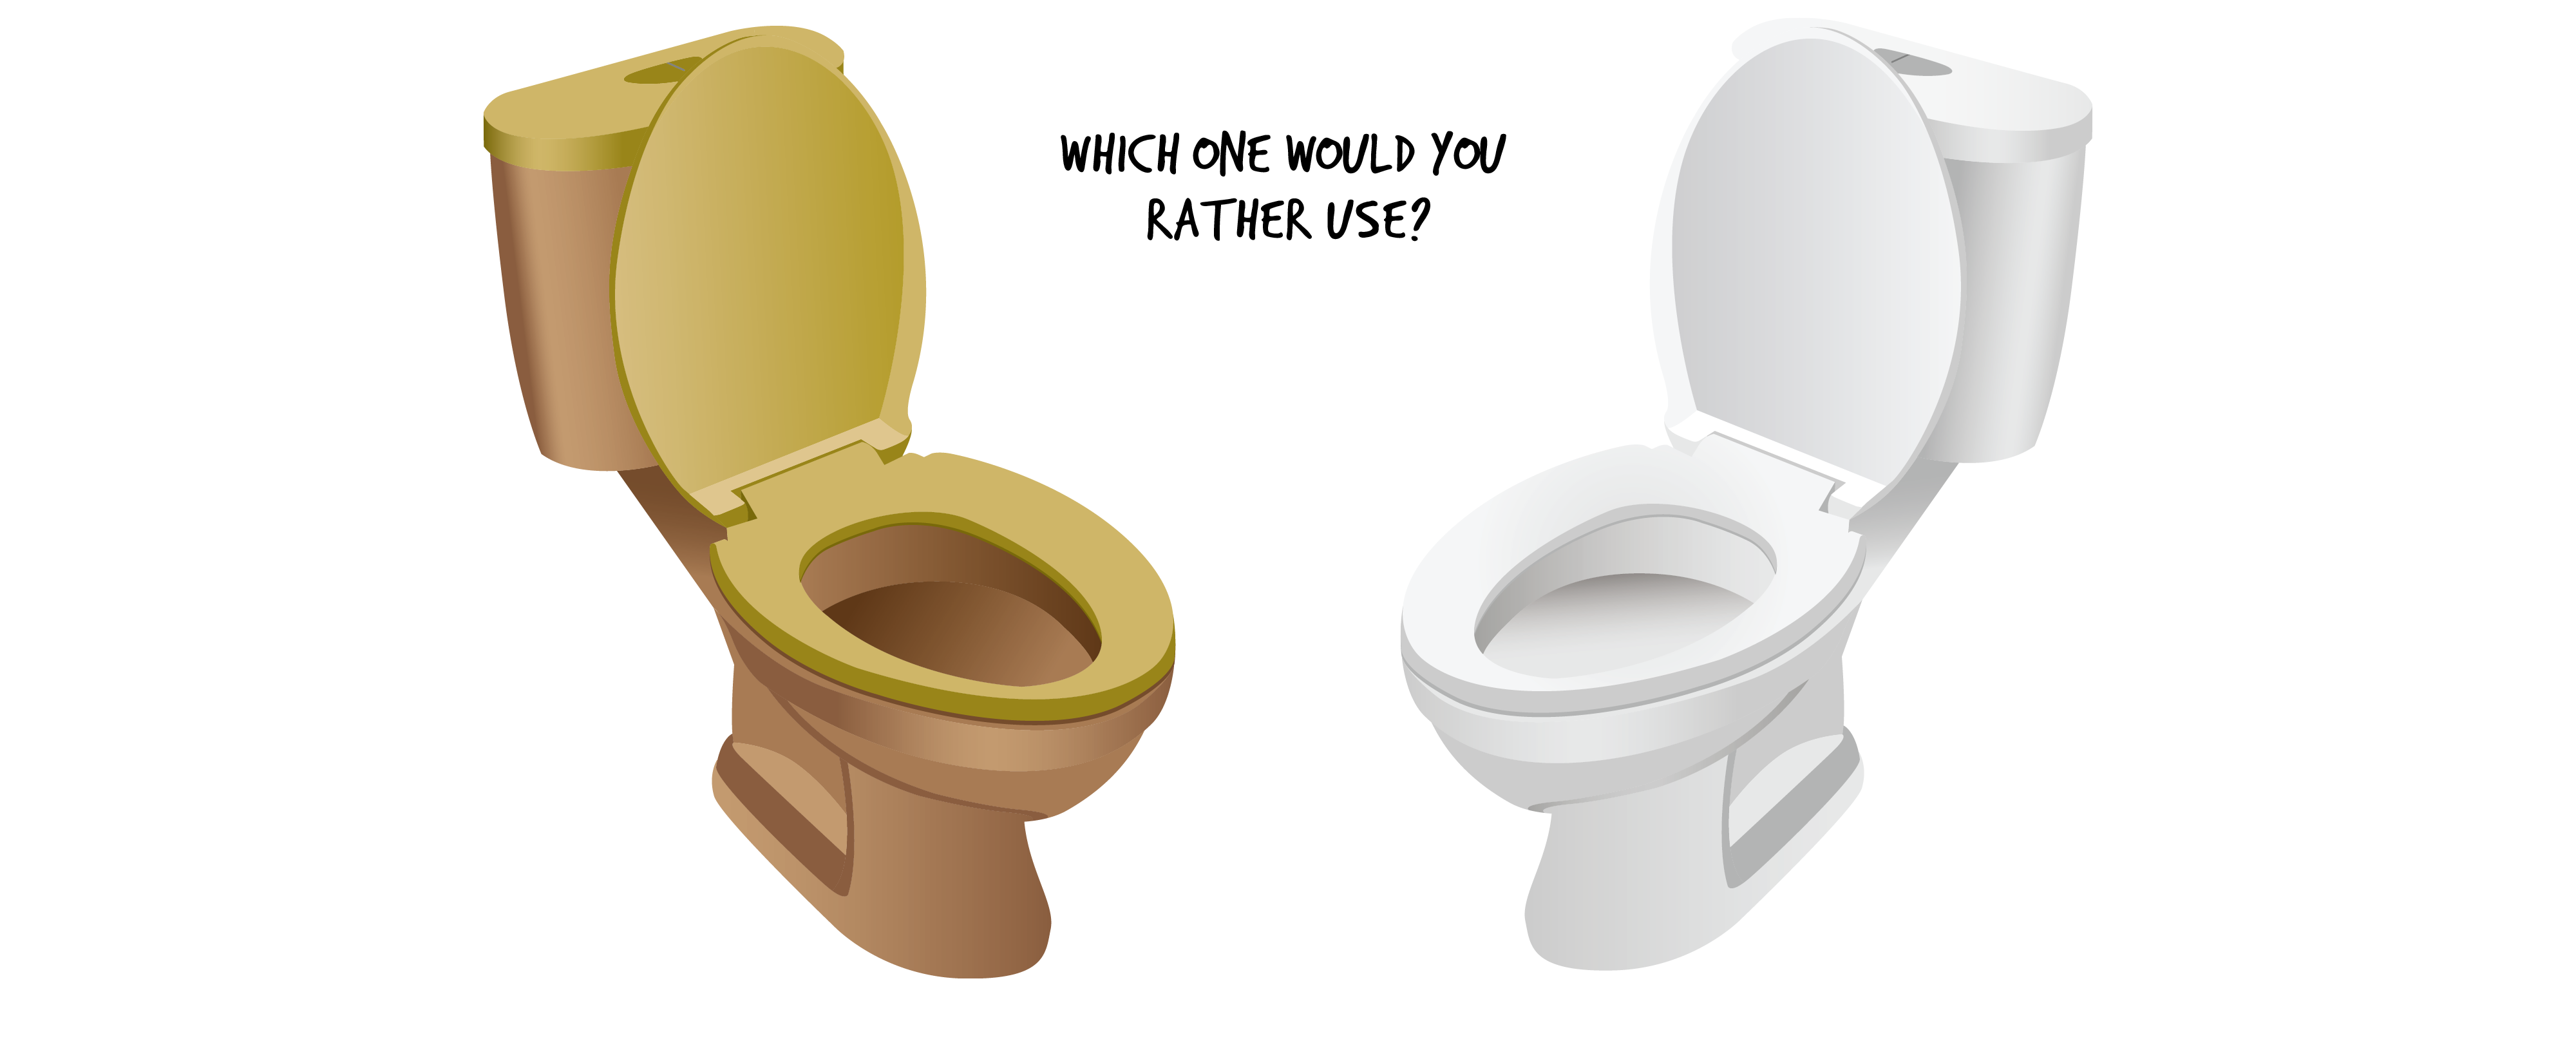 2 toilets sit side by side. The one to the left is yellow. The one to the right is white. In between the toilets is the question Which one would you rather use?